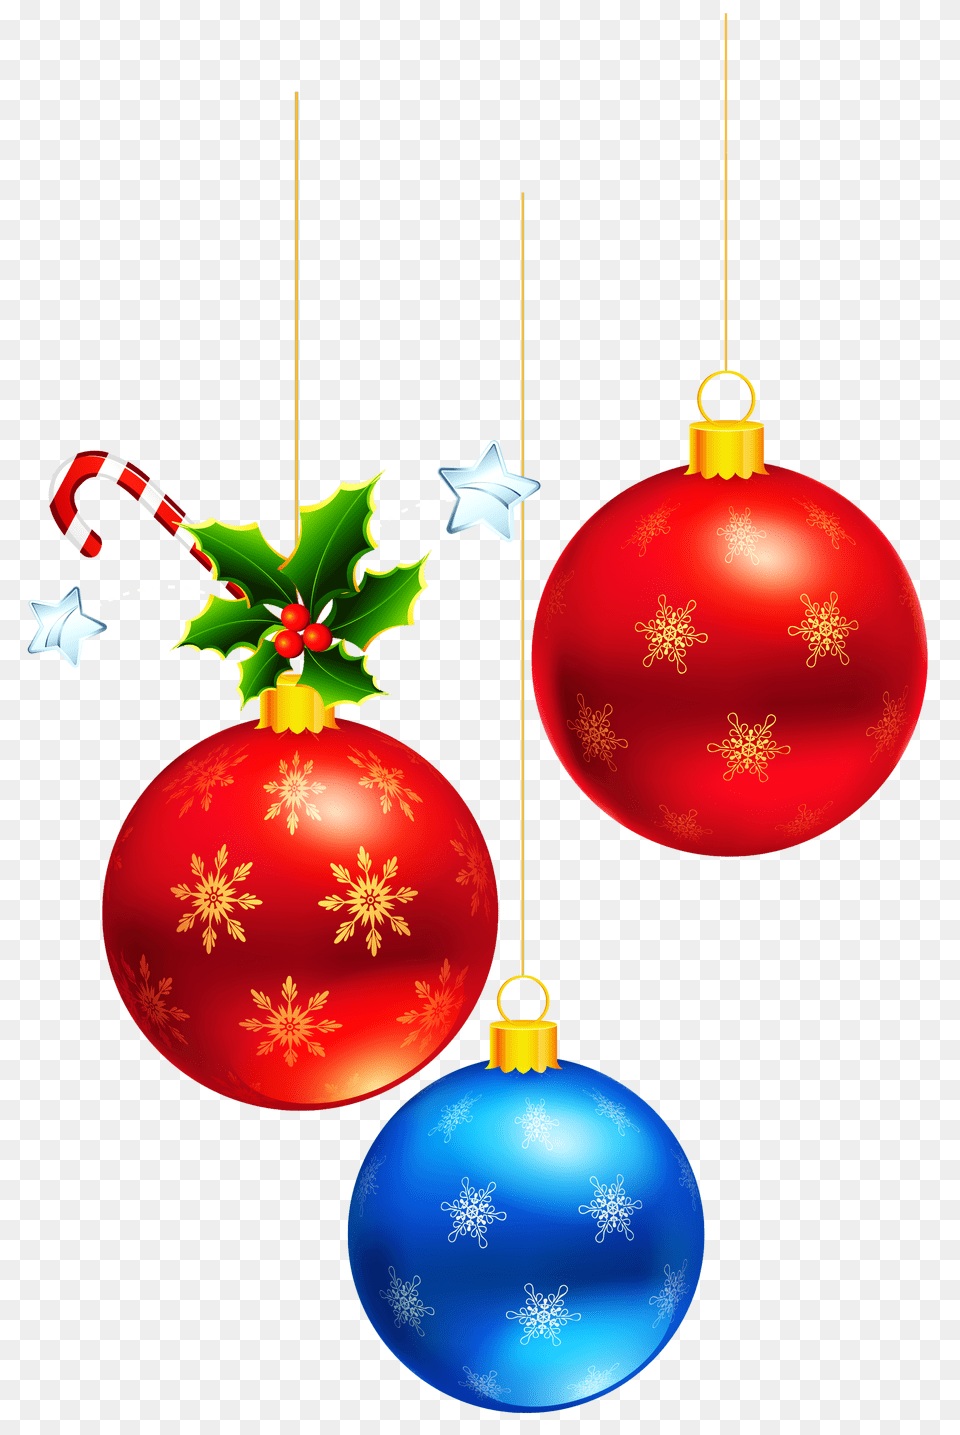 Hanging Christmas Ornament Christmas Ornaments Transparent, Accessories Png